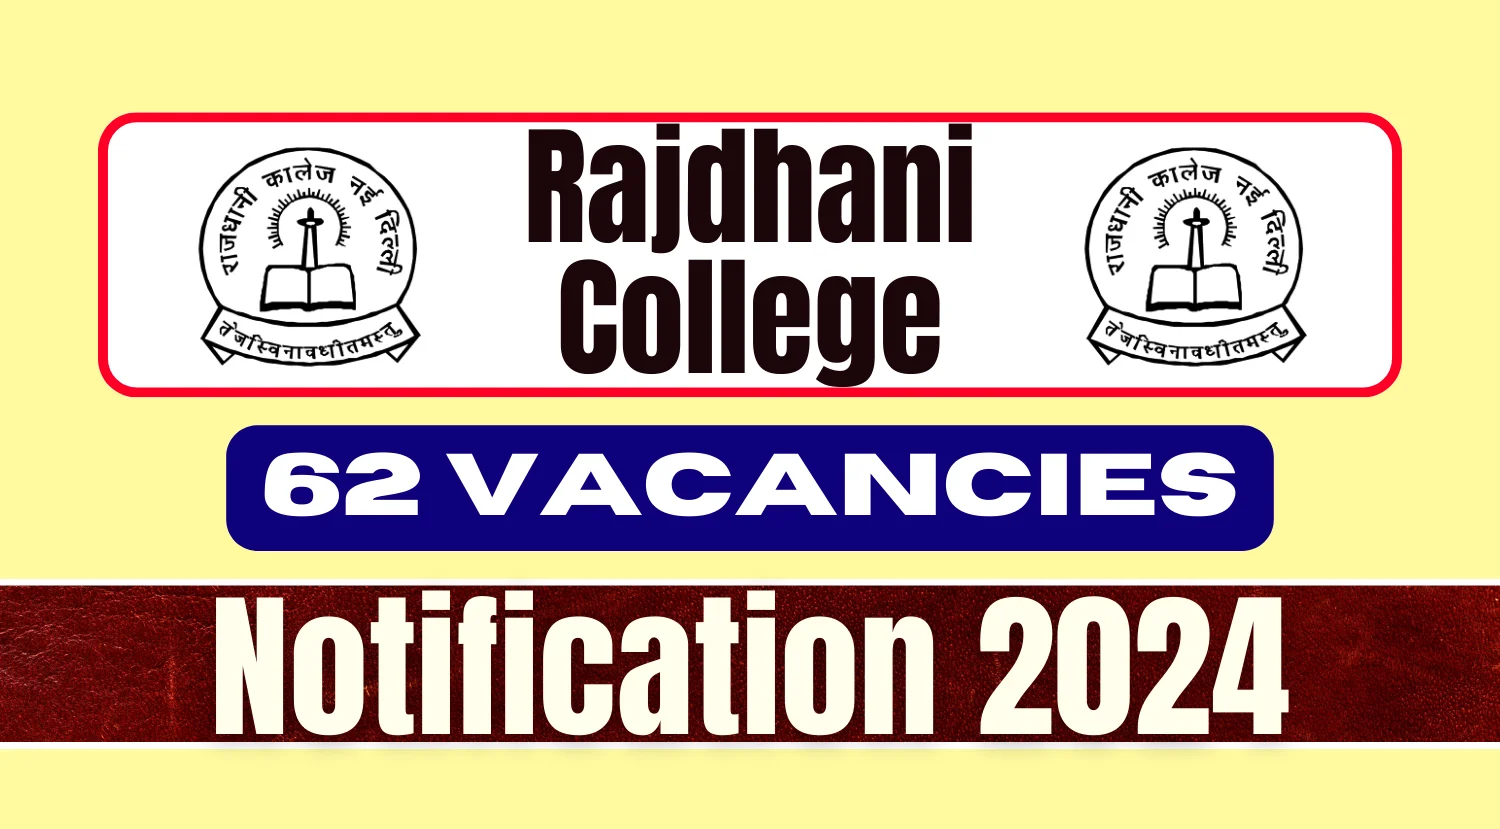 Rajdhani College Recruitment 2024 Notification for 62 Vacancies Out